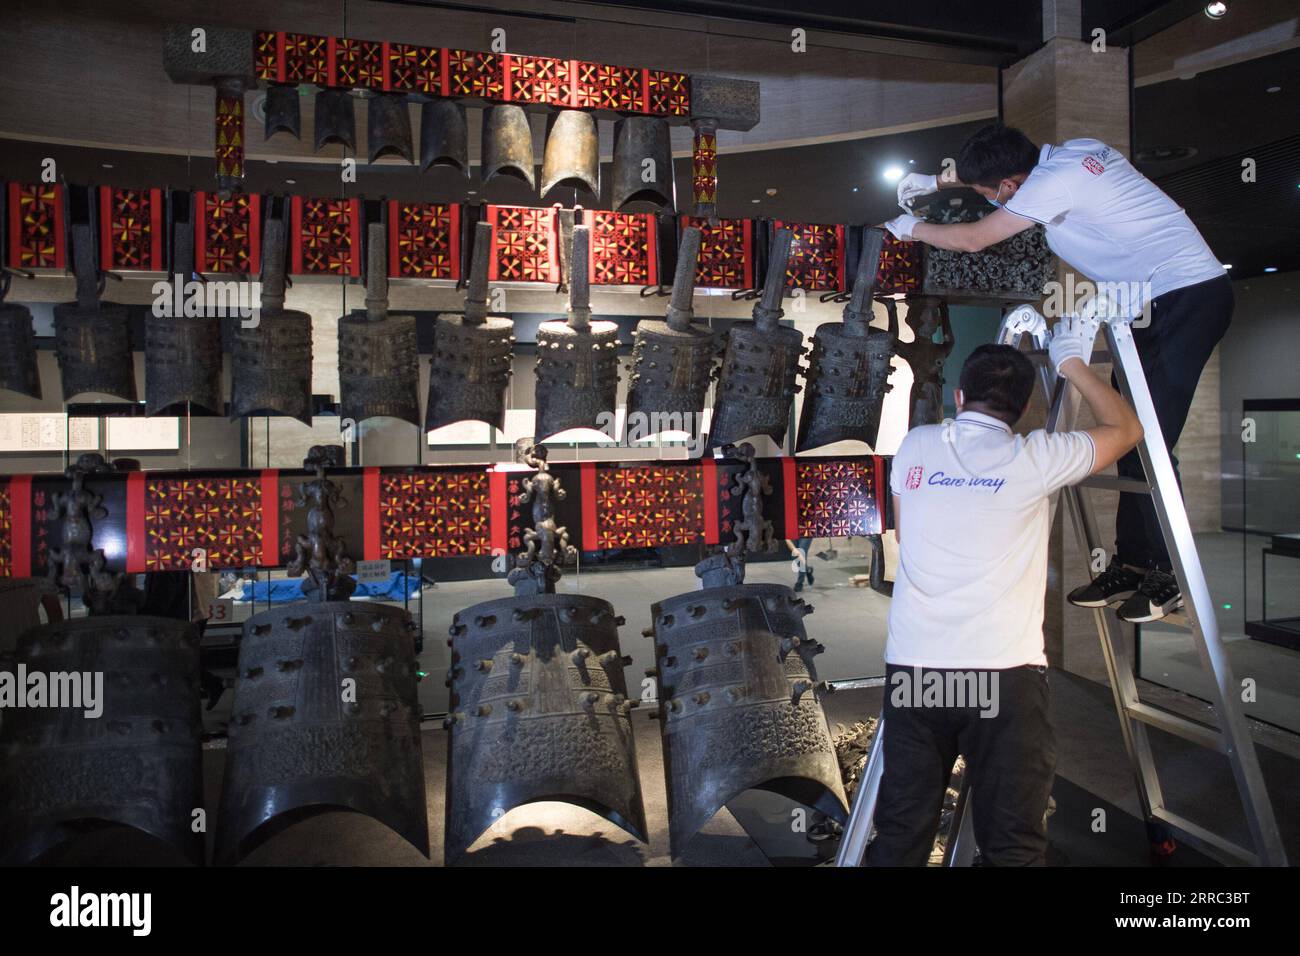 211015 -- WUHAN, Oct. 15, 2021 -- Staff members adjust chime bells after they were transferred to a newly-built exhibition hall of Hubei Provincial Museum in Wuhan, central China s Hubei Province, Oct. 15, 2021. The set of chime bells were recently relocated to the newly-built third phase project of the museum. Chime bell, or bian zhong in Chinese, is a percussion instrument that became prevalent in China from the Western Zhou Dynasty 1046-771 B.C.. The country s largest set of chime bells ever unearthed was found in 1978, also in Suizhou, in the tomb of Marquis Yi, a ruler of the ancient Zeng Stock Photo